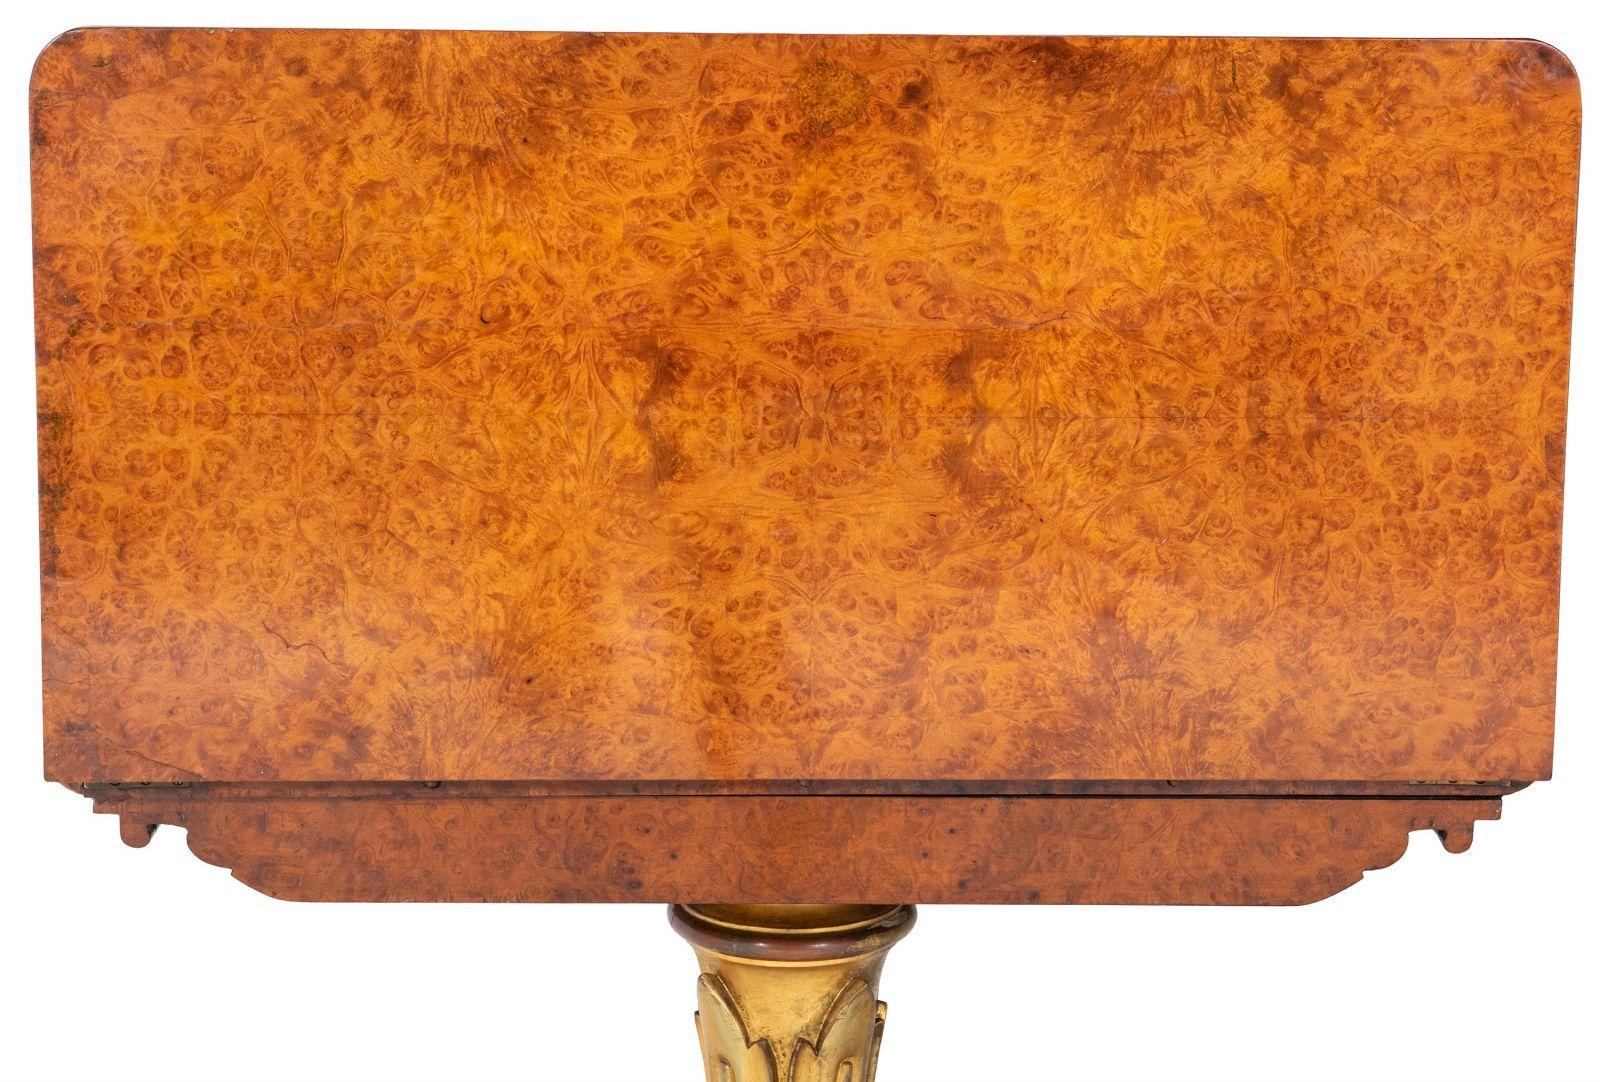 Introducing a stunning George IV amboyna card table adorned with exquisite gilt wood decoration, showcasing the epitome of fine craftsmanship from the English circa 1830 era.

This remarkable table features a swivel top that gracefully folds over to